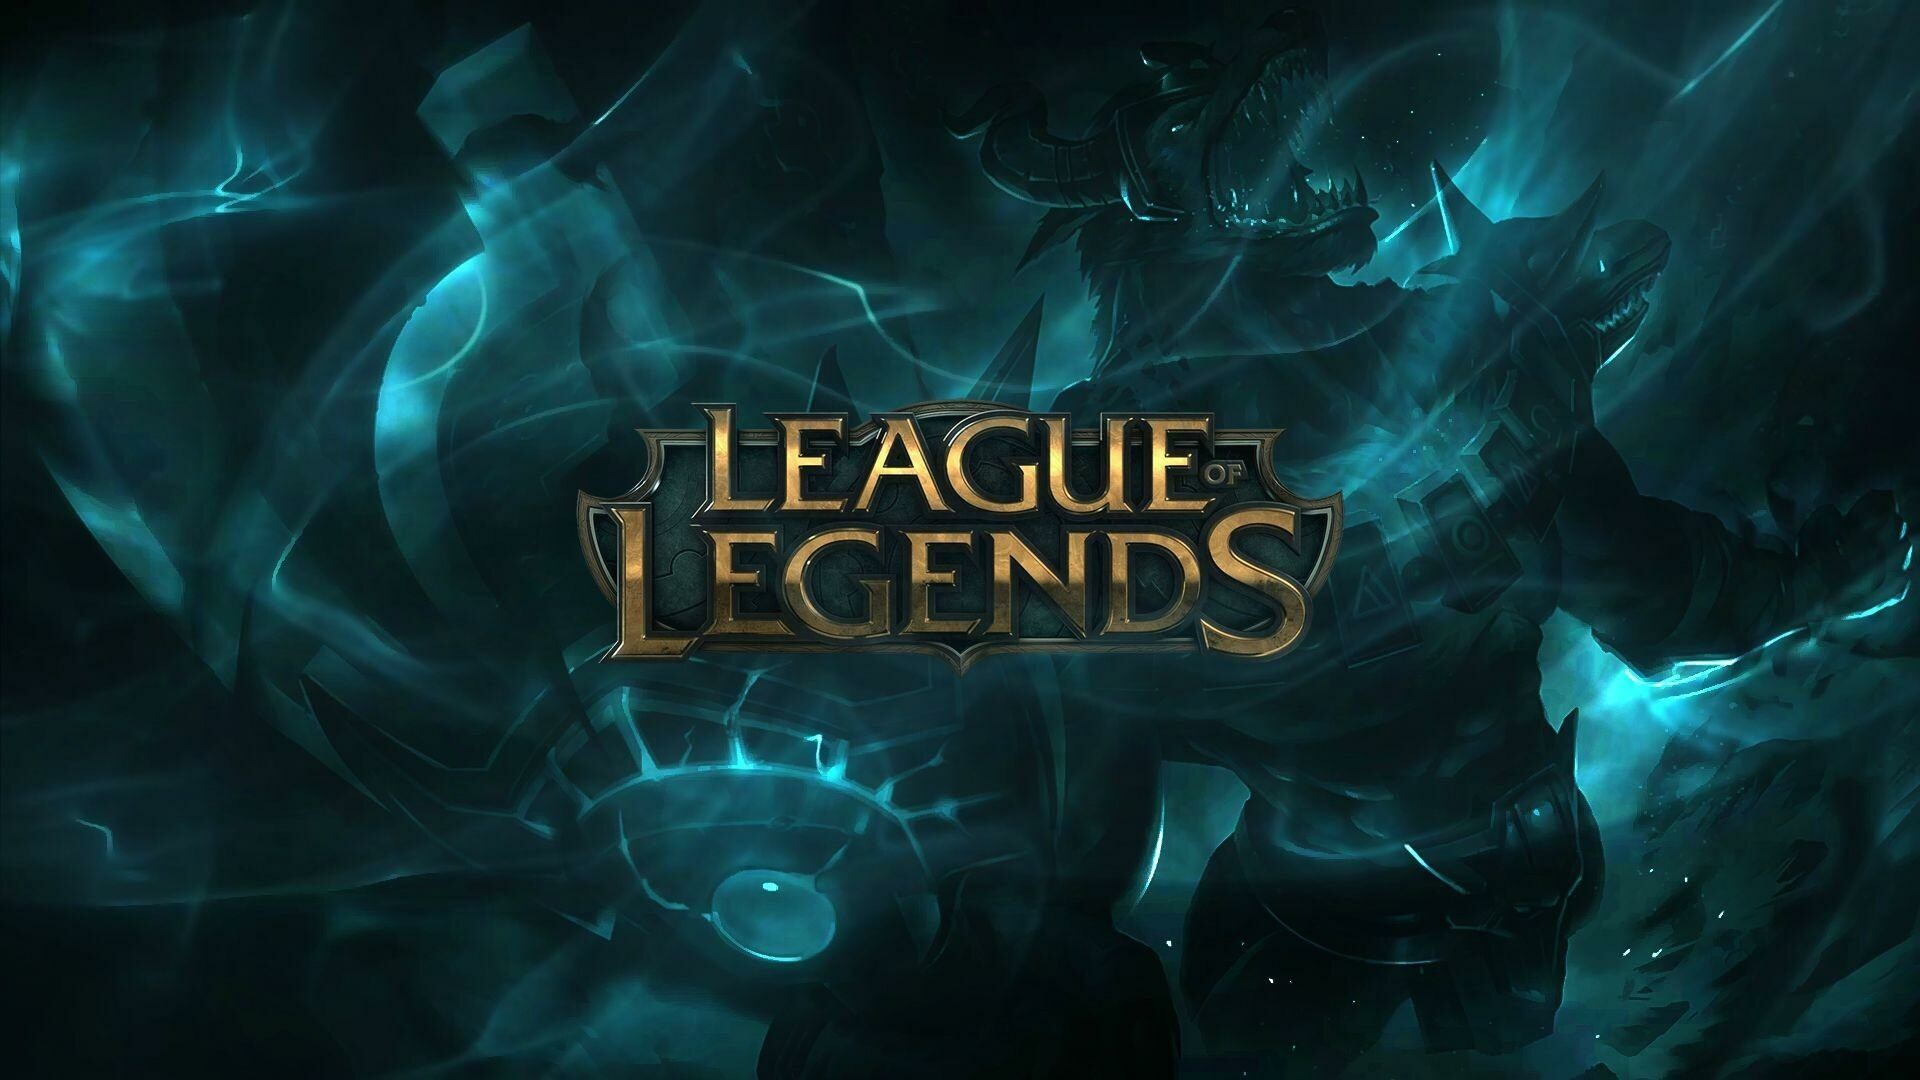 League of Legends: Summoner's Rift is the flagship game mode of the LoL. 1920x1080 Full HD Wallpaper.